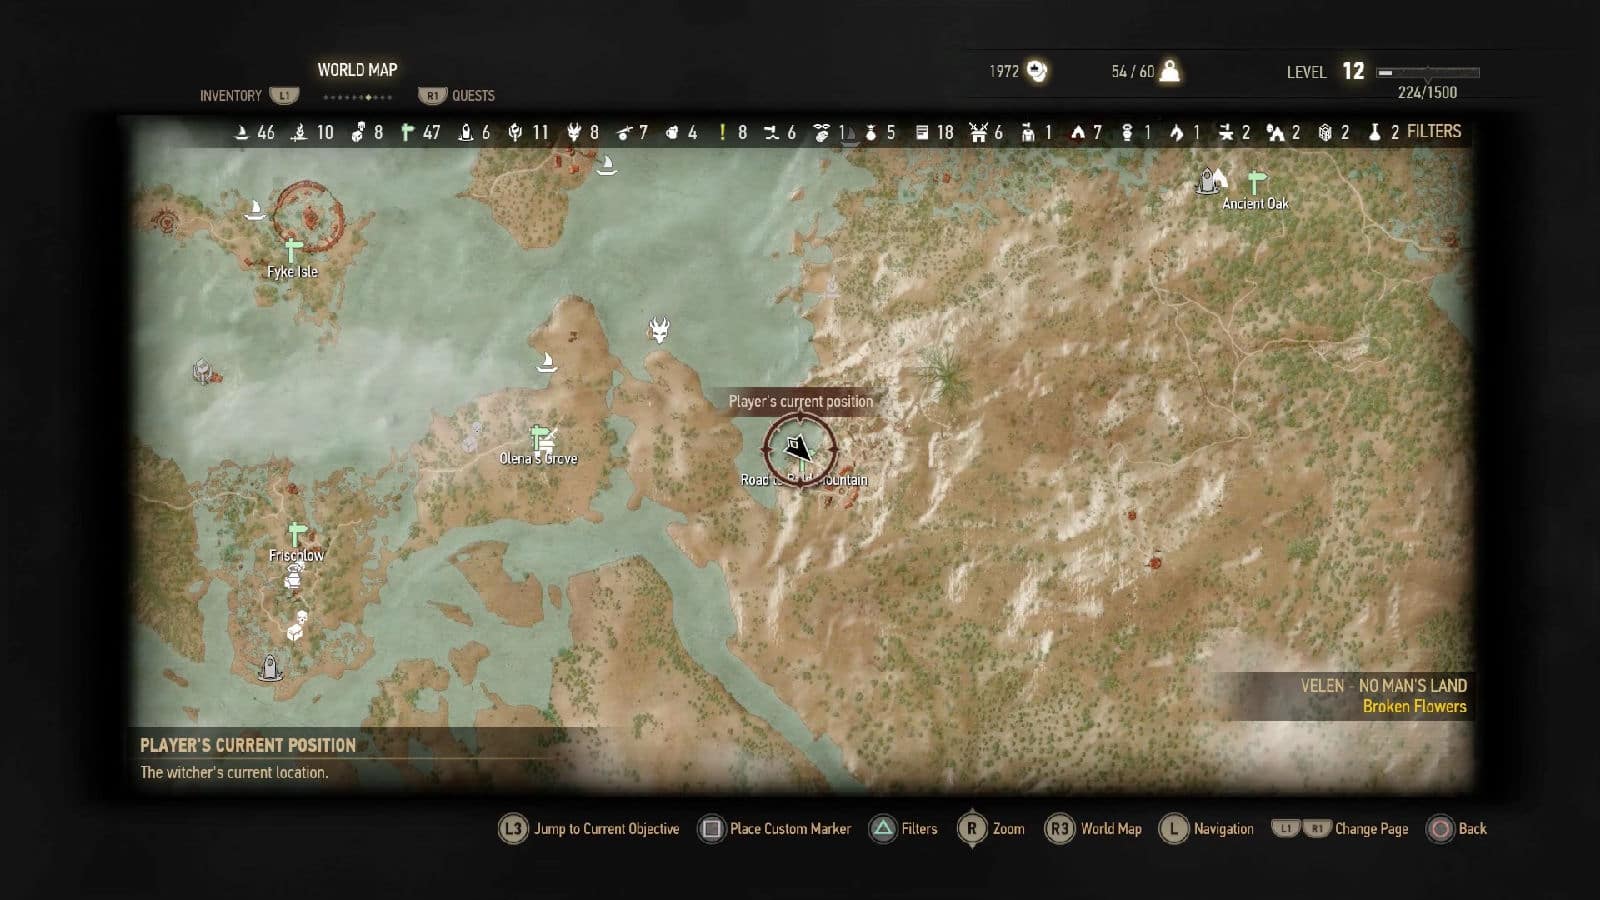 The Witcher 3 Map